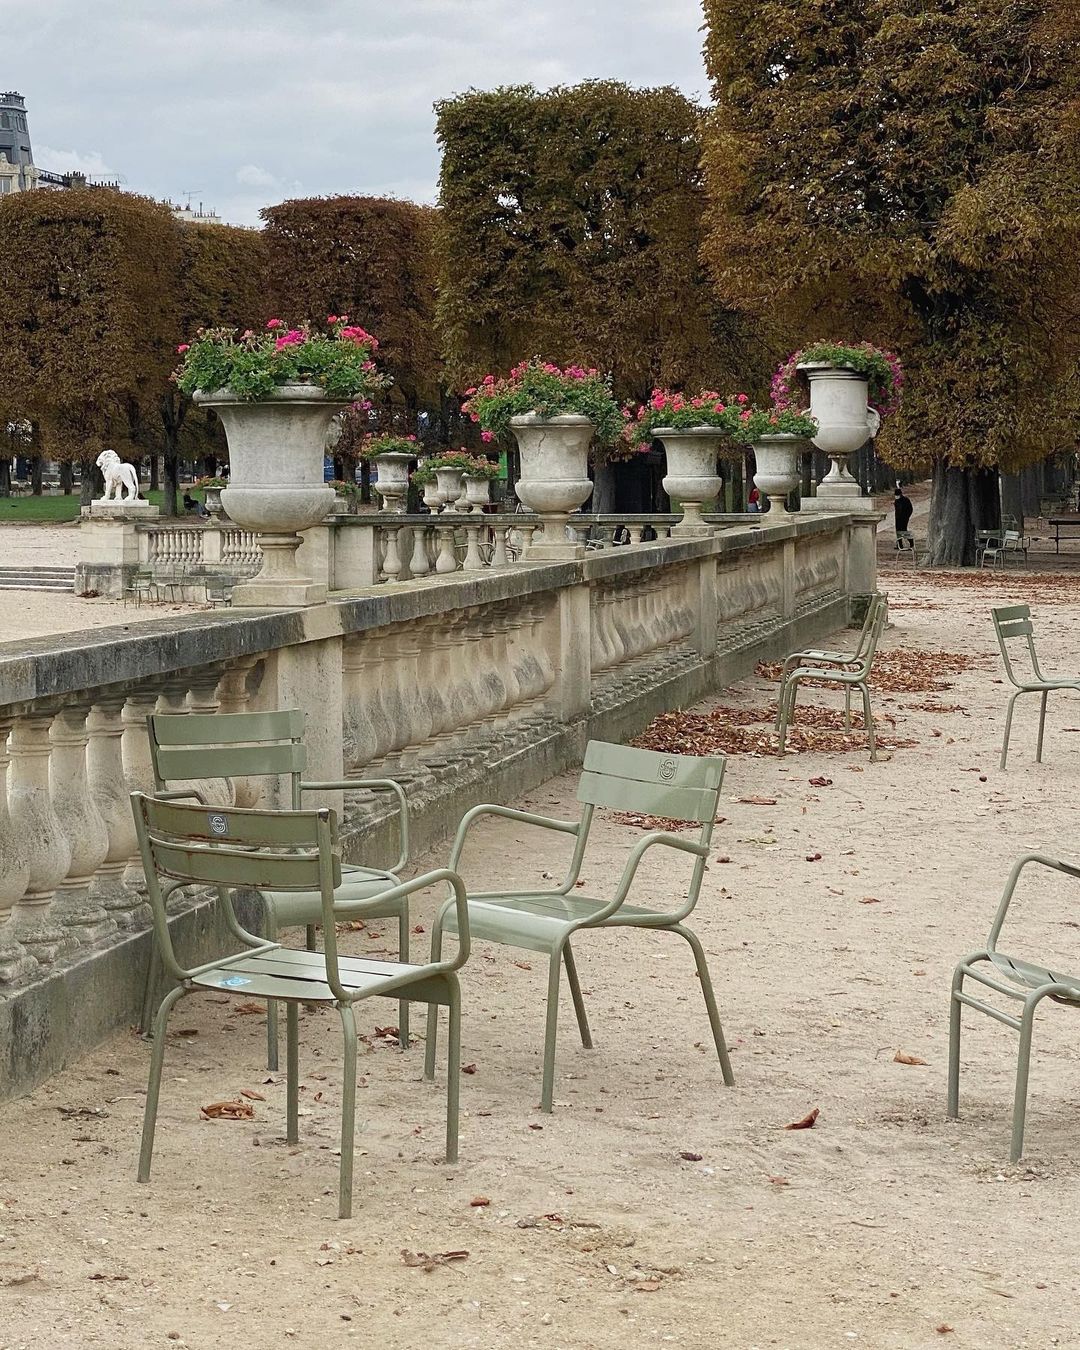 Iconic green metal chairs at Jardin du Luxembourg